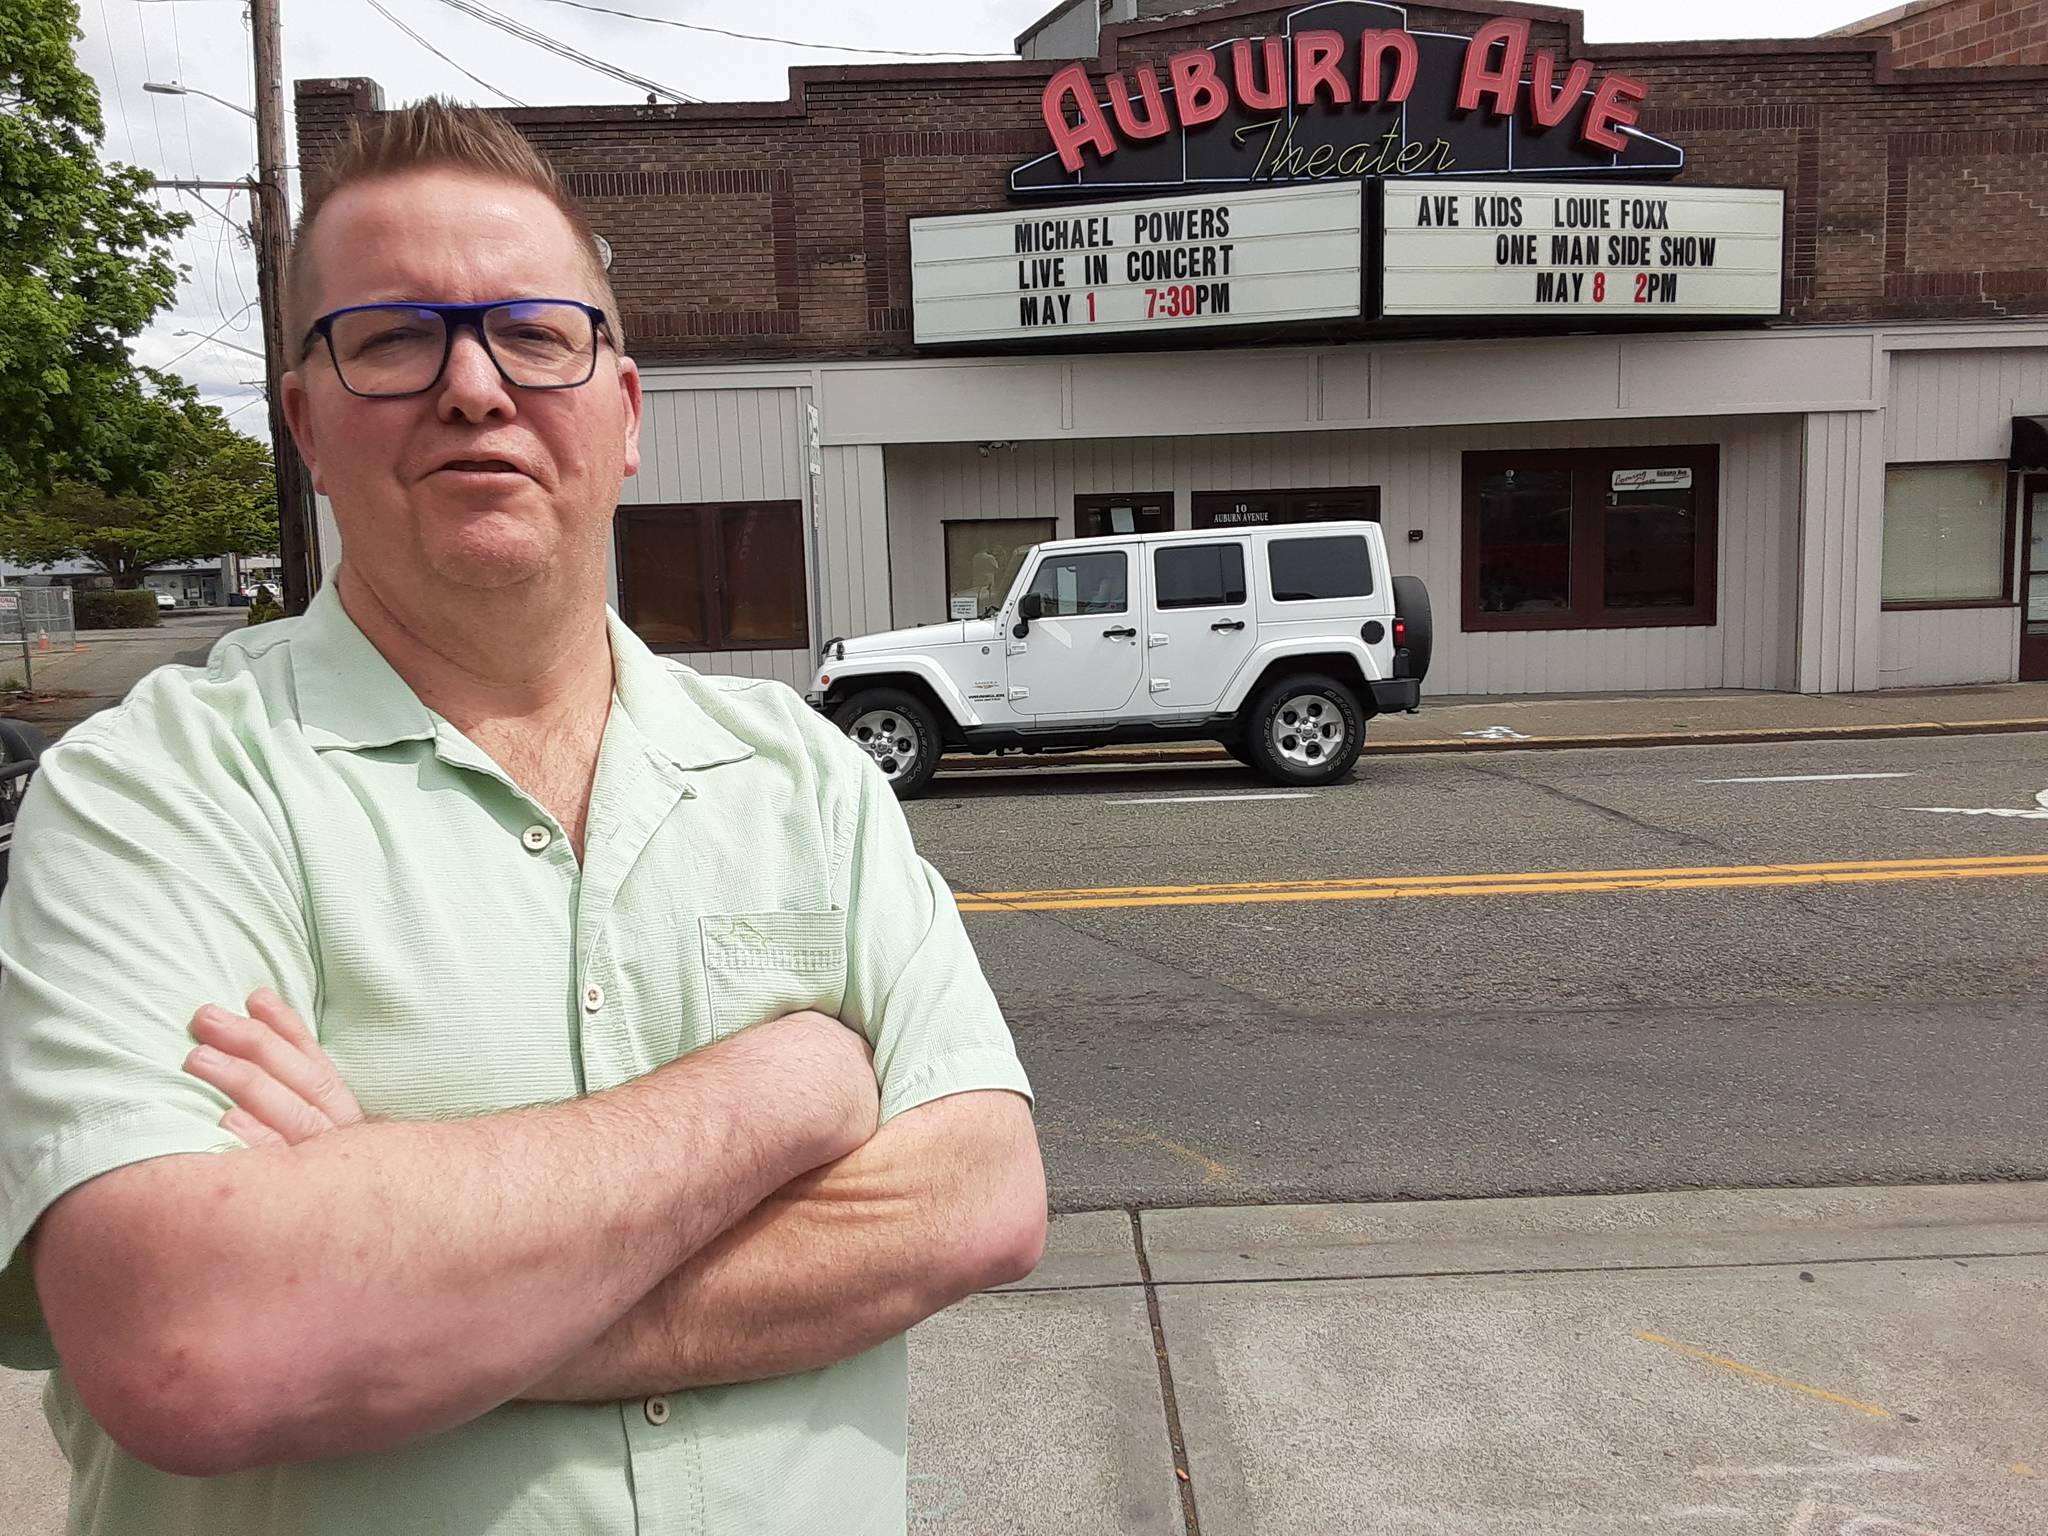 Auburn Avenue Theater Coordinator Jim Kleinbeck returns live performance to the stage during the month of May, starting with jazz guitarist Michael Powers at 7:30 p.m. May 1. (Robert Whale, Auburn Reporter)